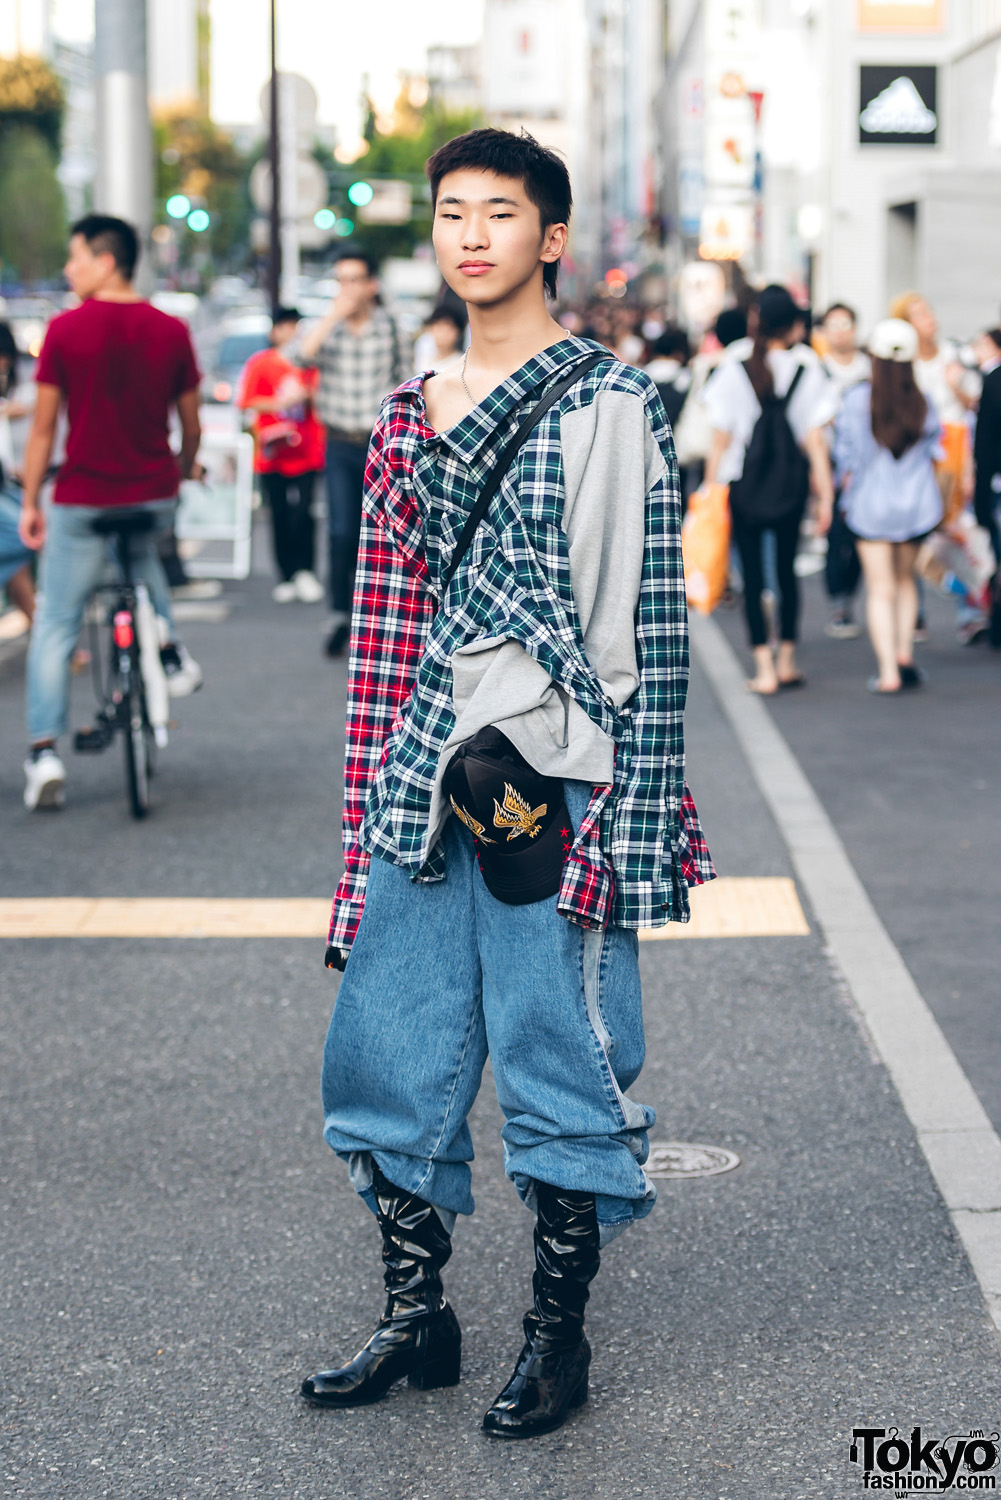 Harajuku Guy in Vintage Remake Fashion w/ Two-Tone Plaid Shirt, Knee-High Leather Boots & Gucci Sling Bag